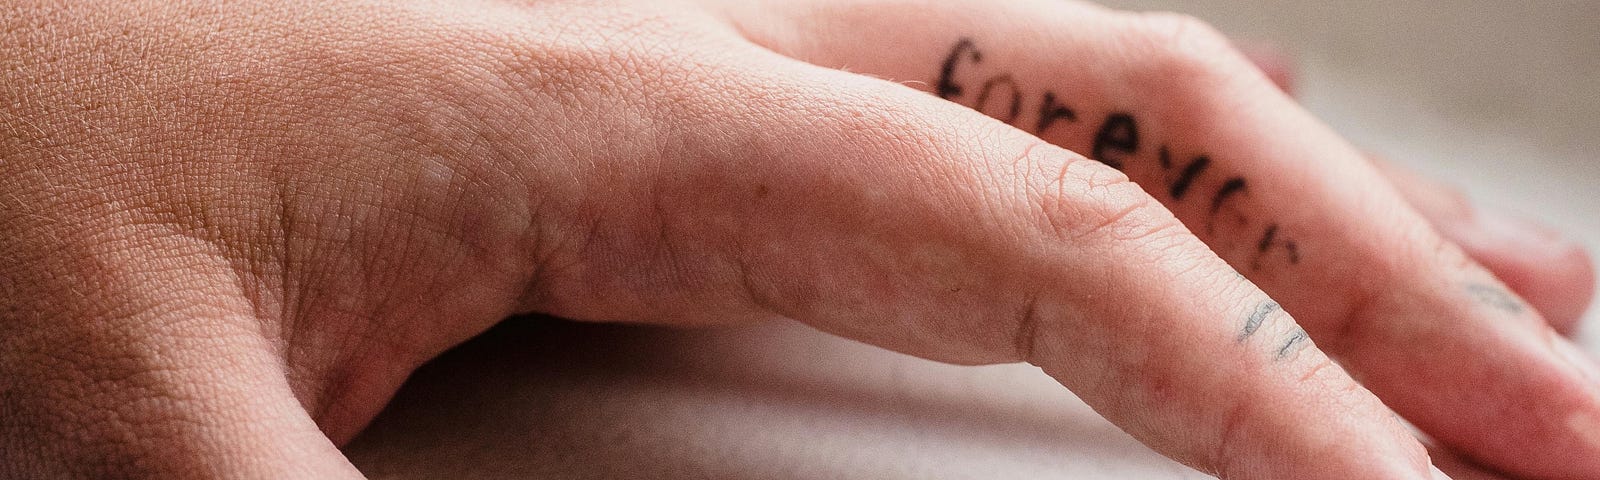 Close-up of a Hand with a Finger Tattoo. Photo by Mizuno K from www.pexels.com.